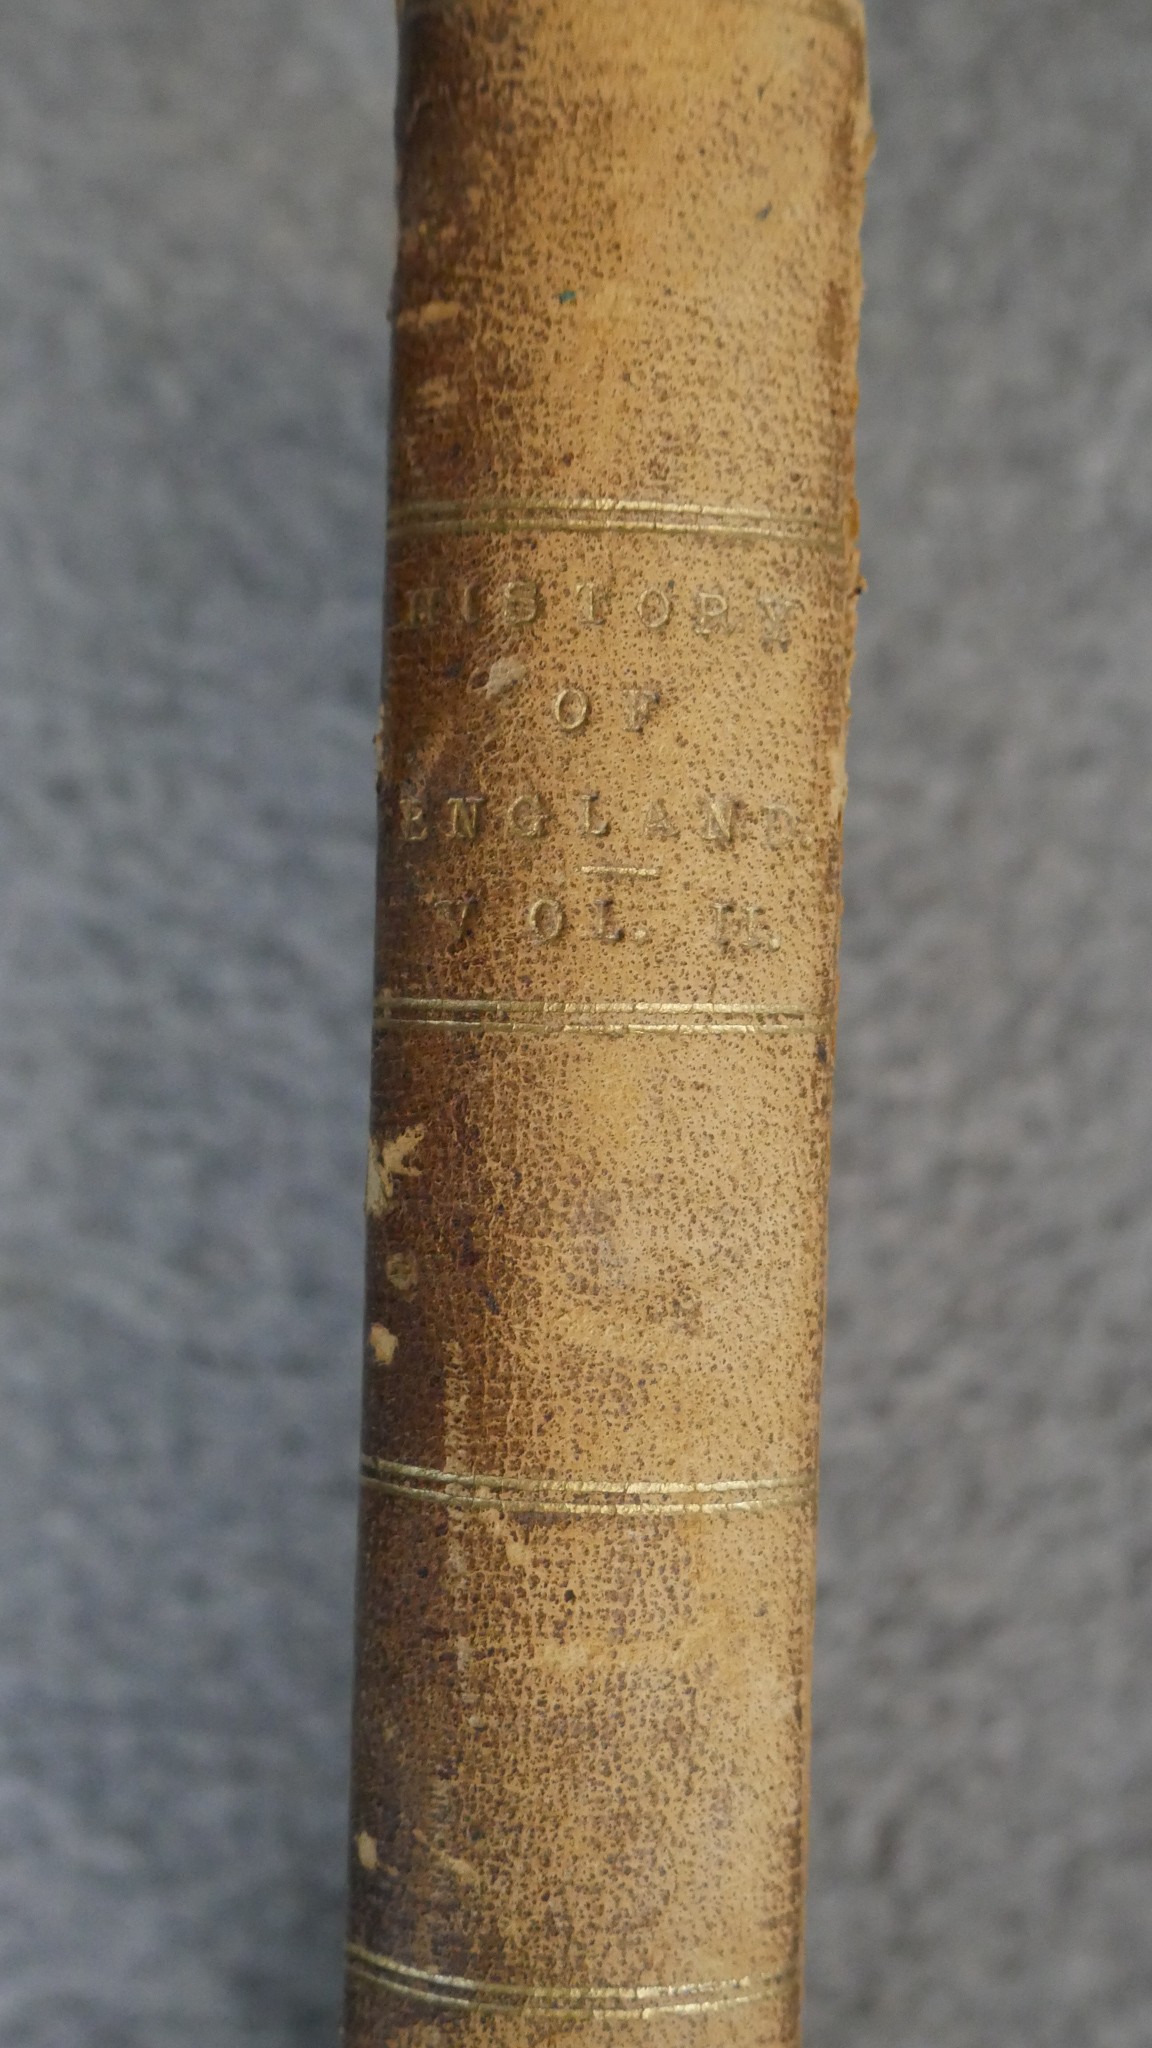 Hume, David The History of England. London, 1807, new edition, 7vo, 2-8. Retailers label in the - Image 5 of 6